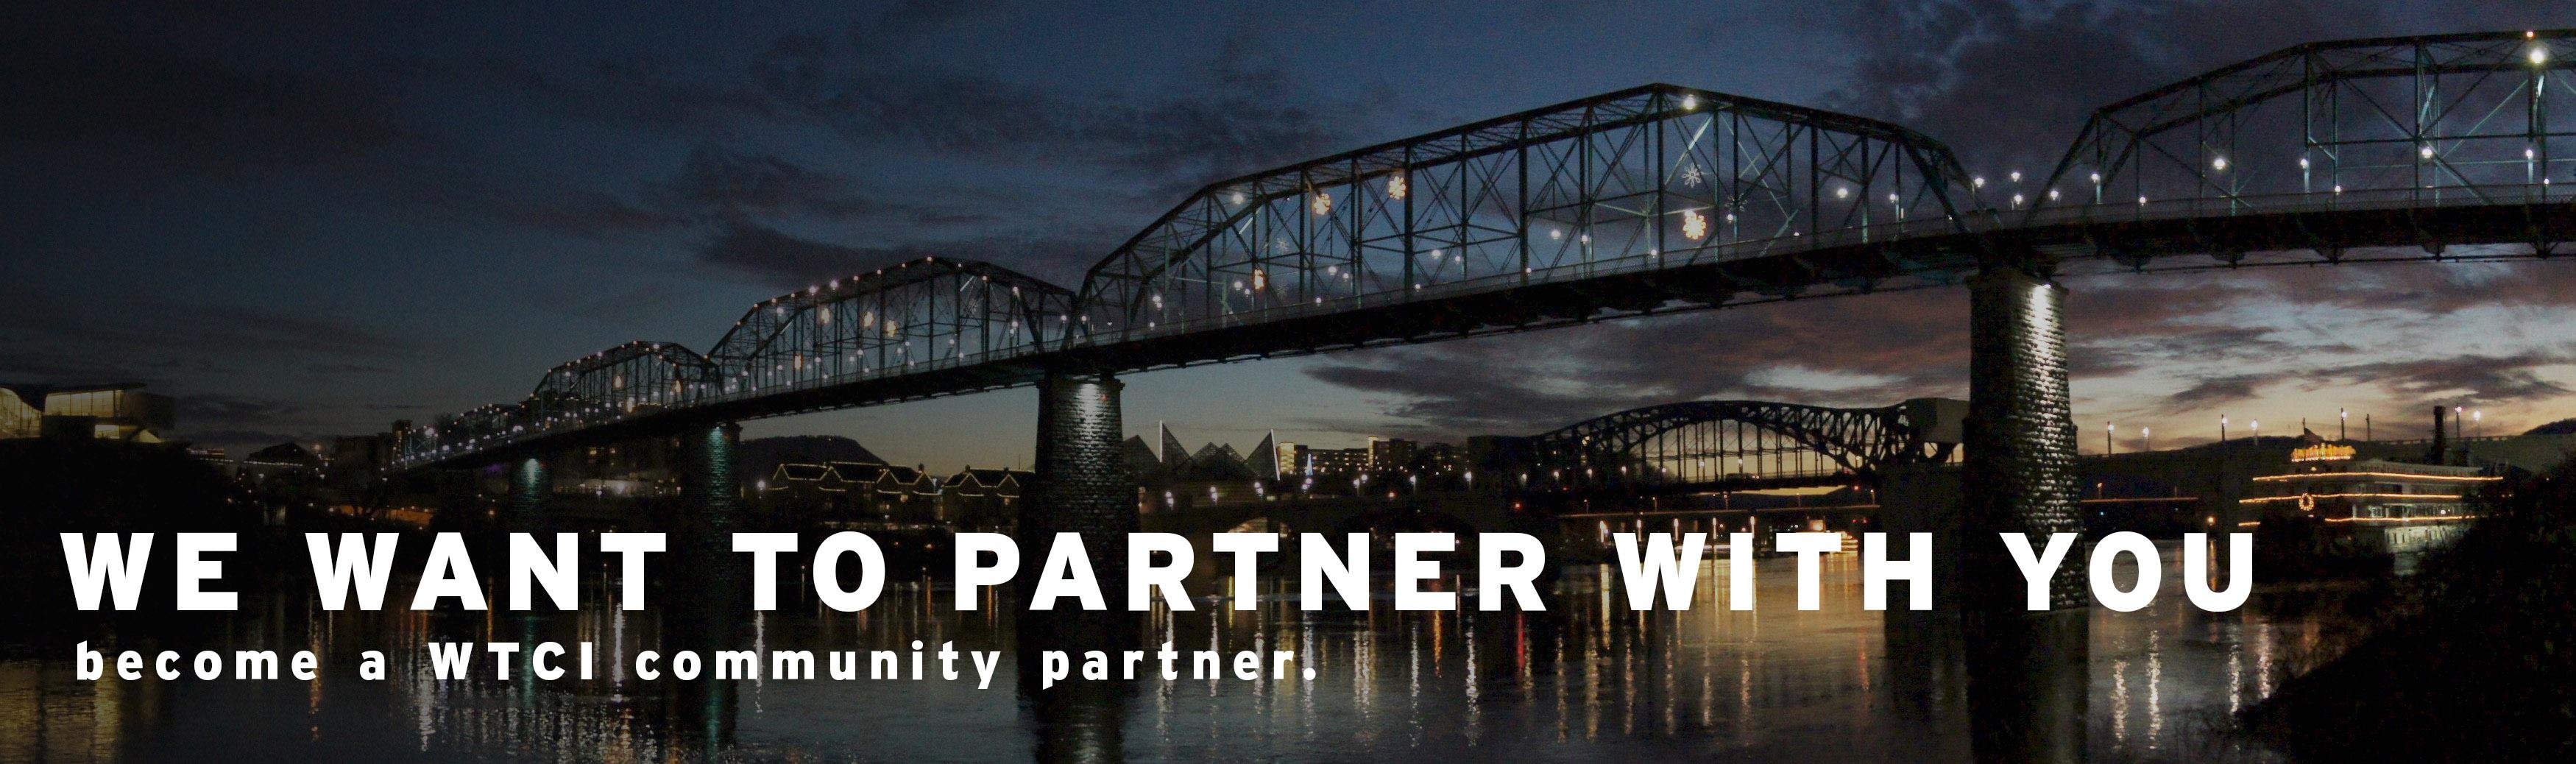 Image of Tennessee River and bridges at dusk with text that reads "We want to partner with you. Become a WTCI community partner"